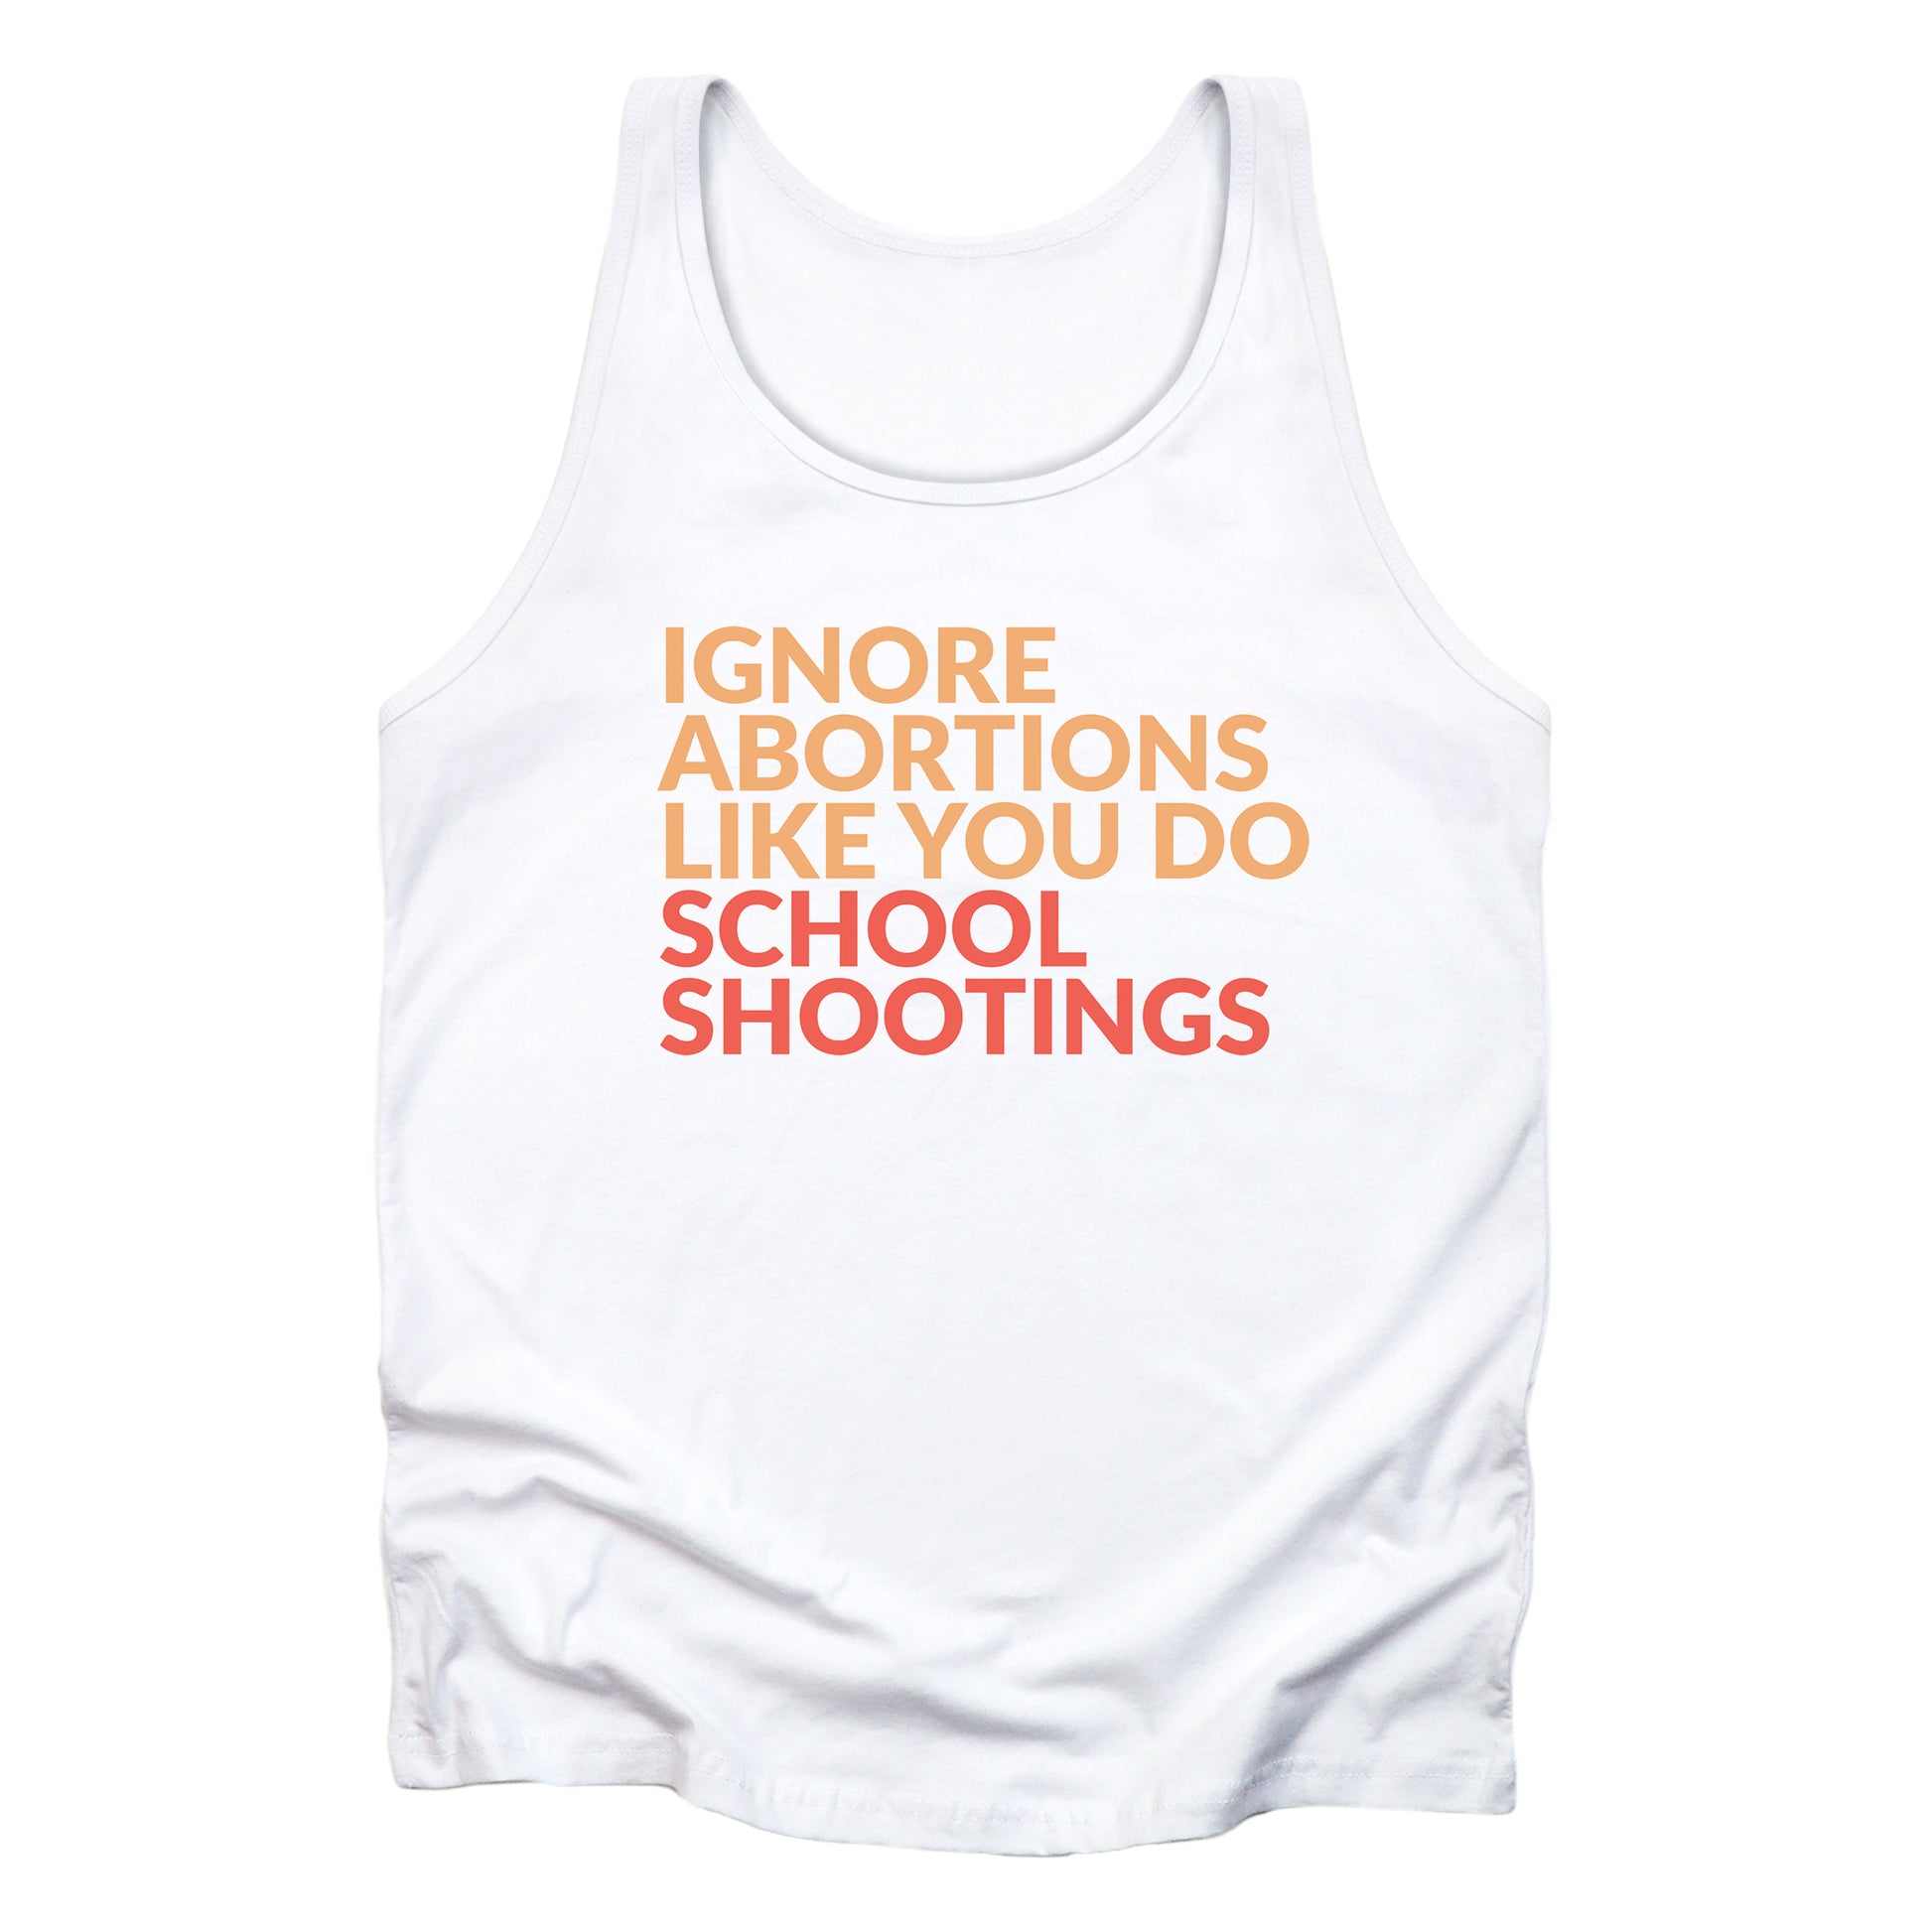 White tank top that says “Ignore abortions like you do school shootings” in all caps in an orange font. The words “school shootings” are in red.